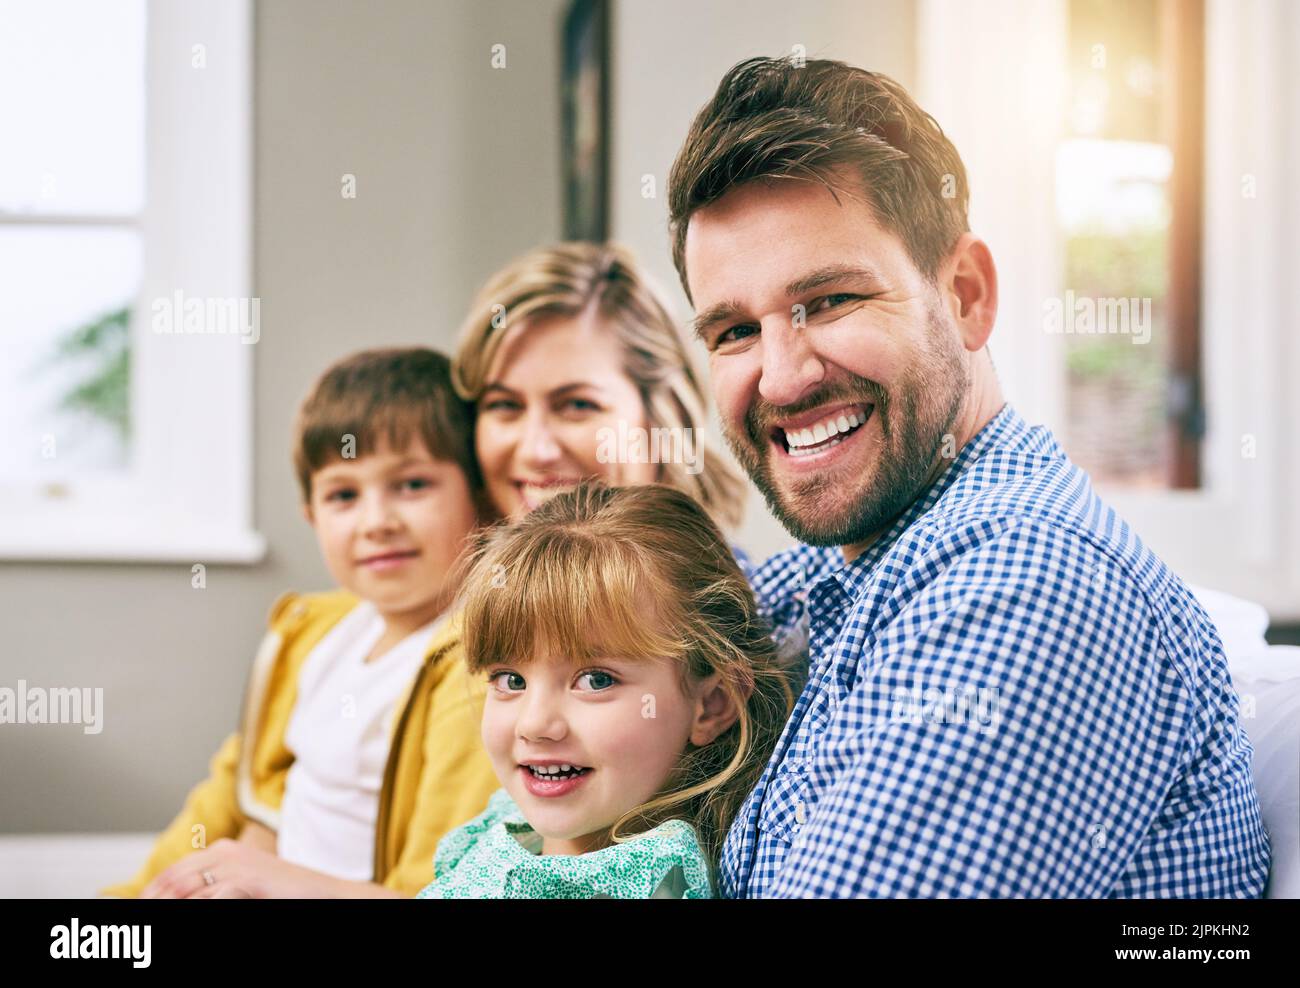 We all about love and happiness. a family sitting on the sofa at home. Stock Photo